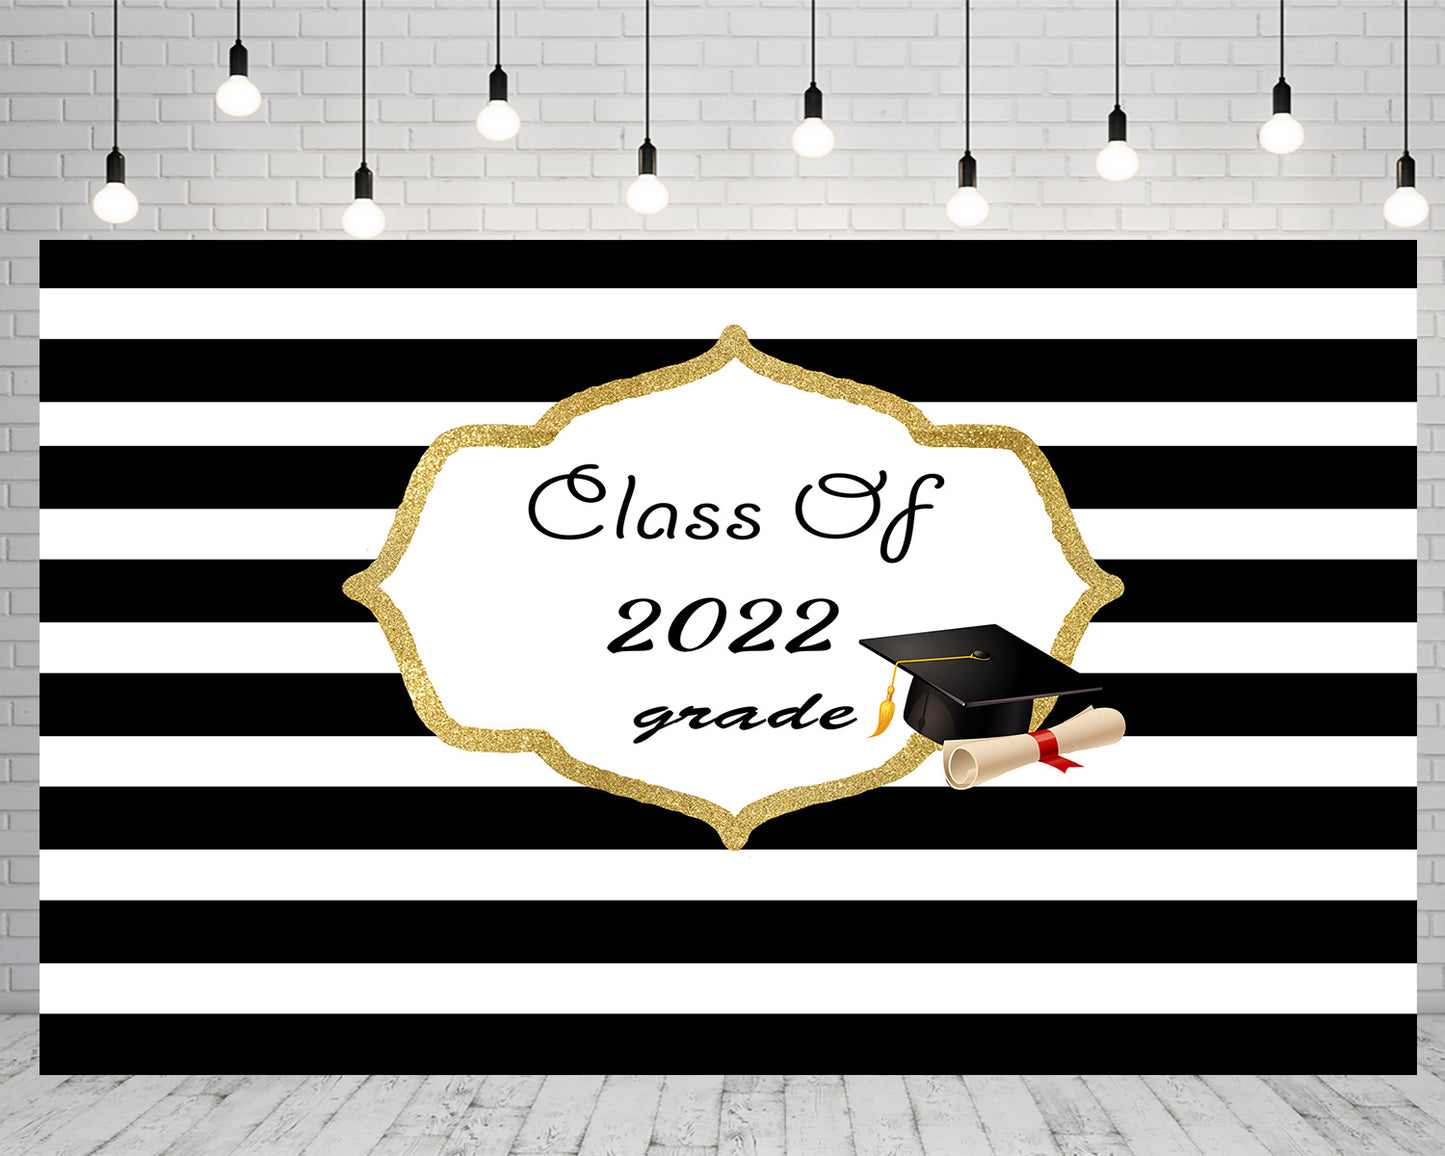 Striped Background Graduation Photo Booth Backdrop Graduation Party Decorations TKH1881